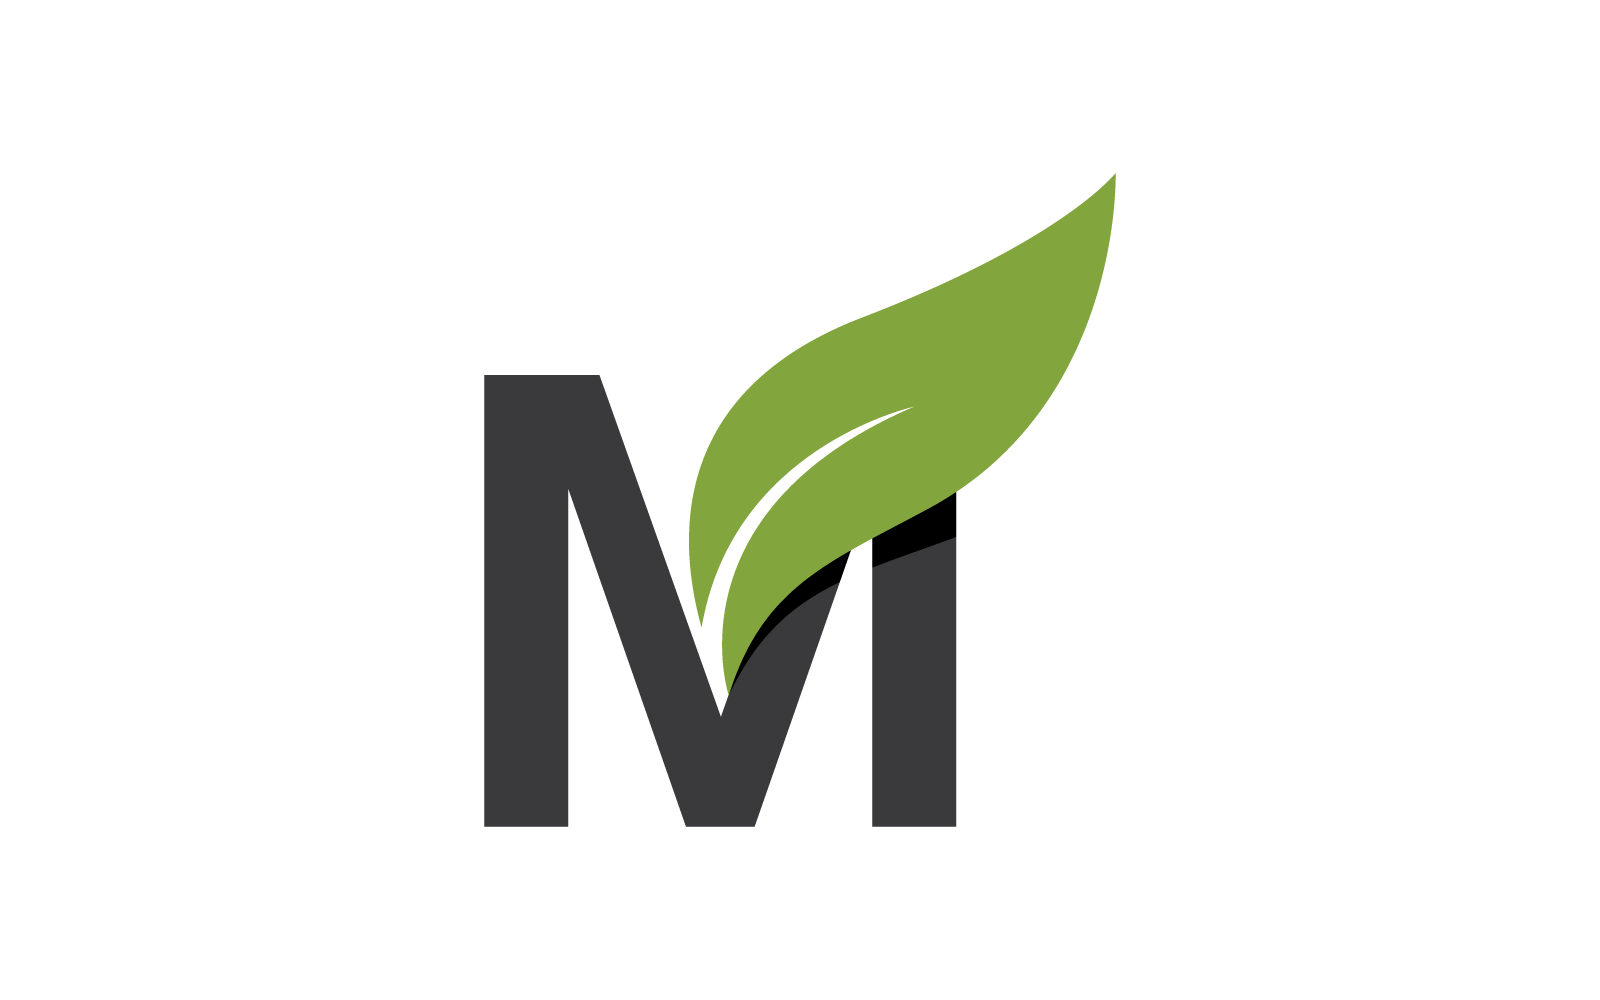 M Initial letter with green leaf logo vector flat design